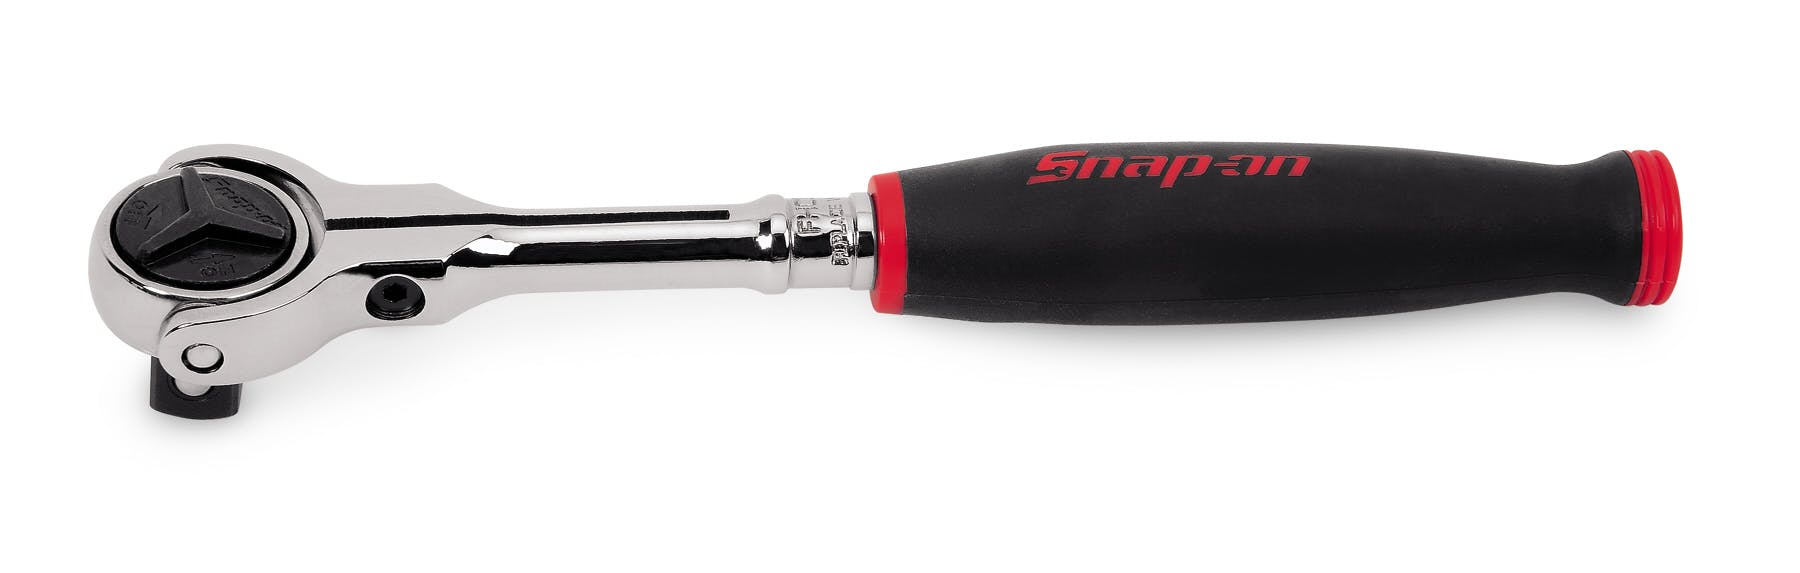 NEW Snap-on™ 3/8" drive 6 7/8" long Round SWIVEL Head Compact Ratchet FHCNF72R 